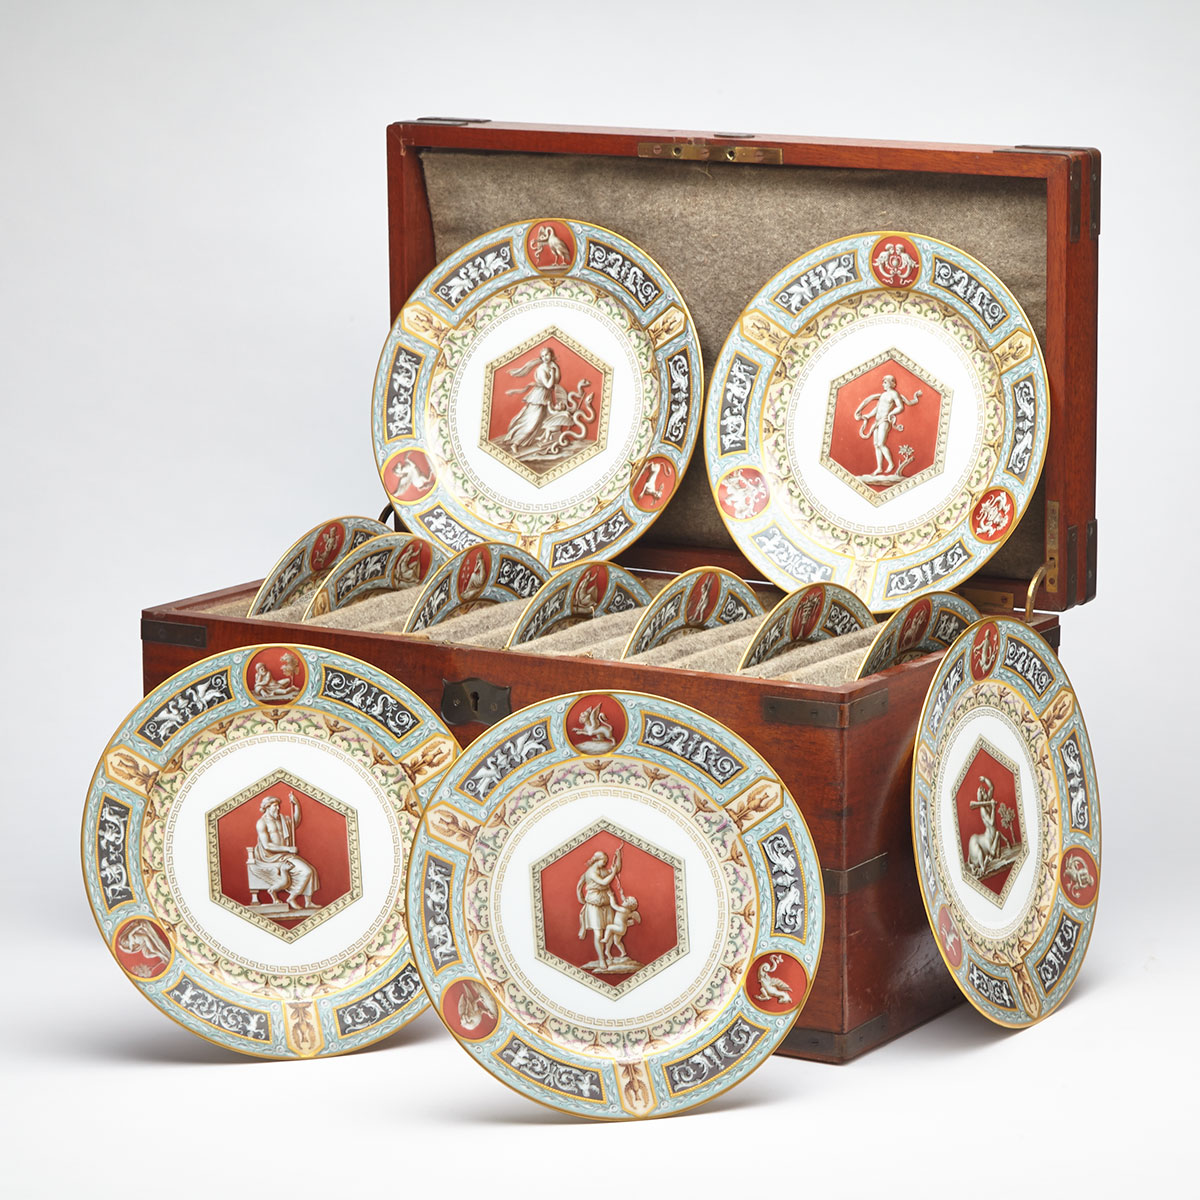 Rare Set of Twelve Russian Imperial Porcelain Dinner Plates, from the Raphael Service, periods of Alexander III and Nicholas II, 1884-1903